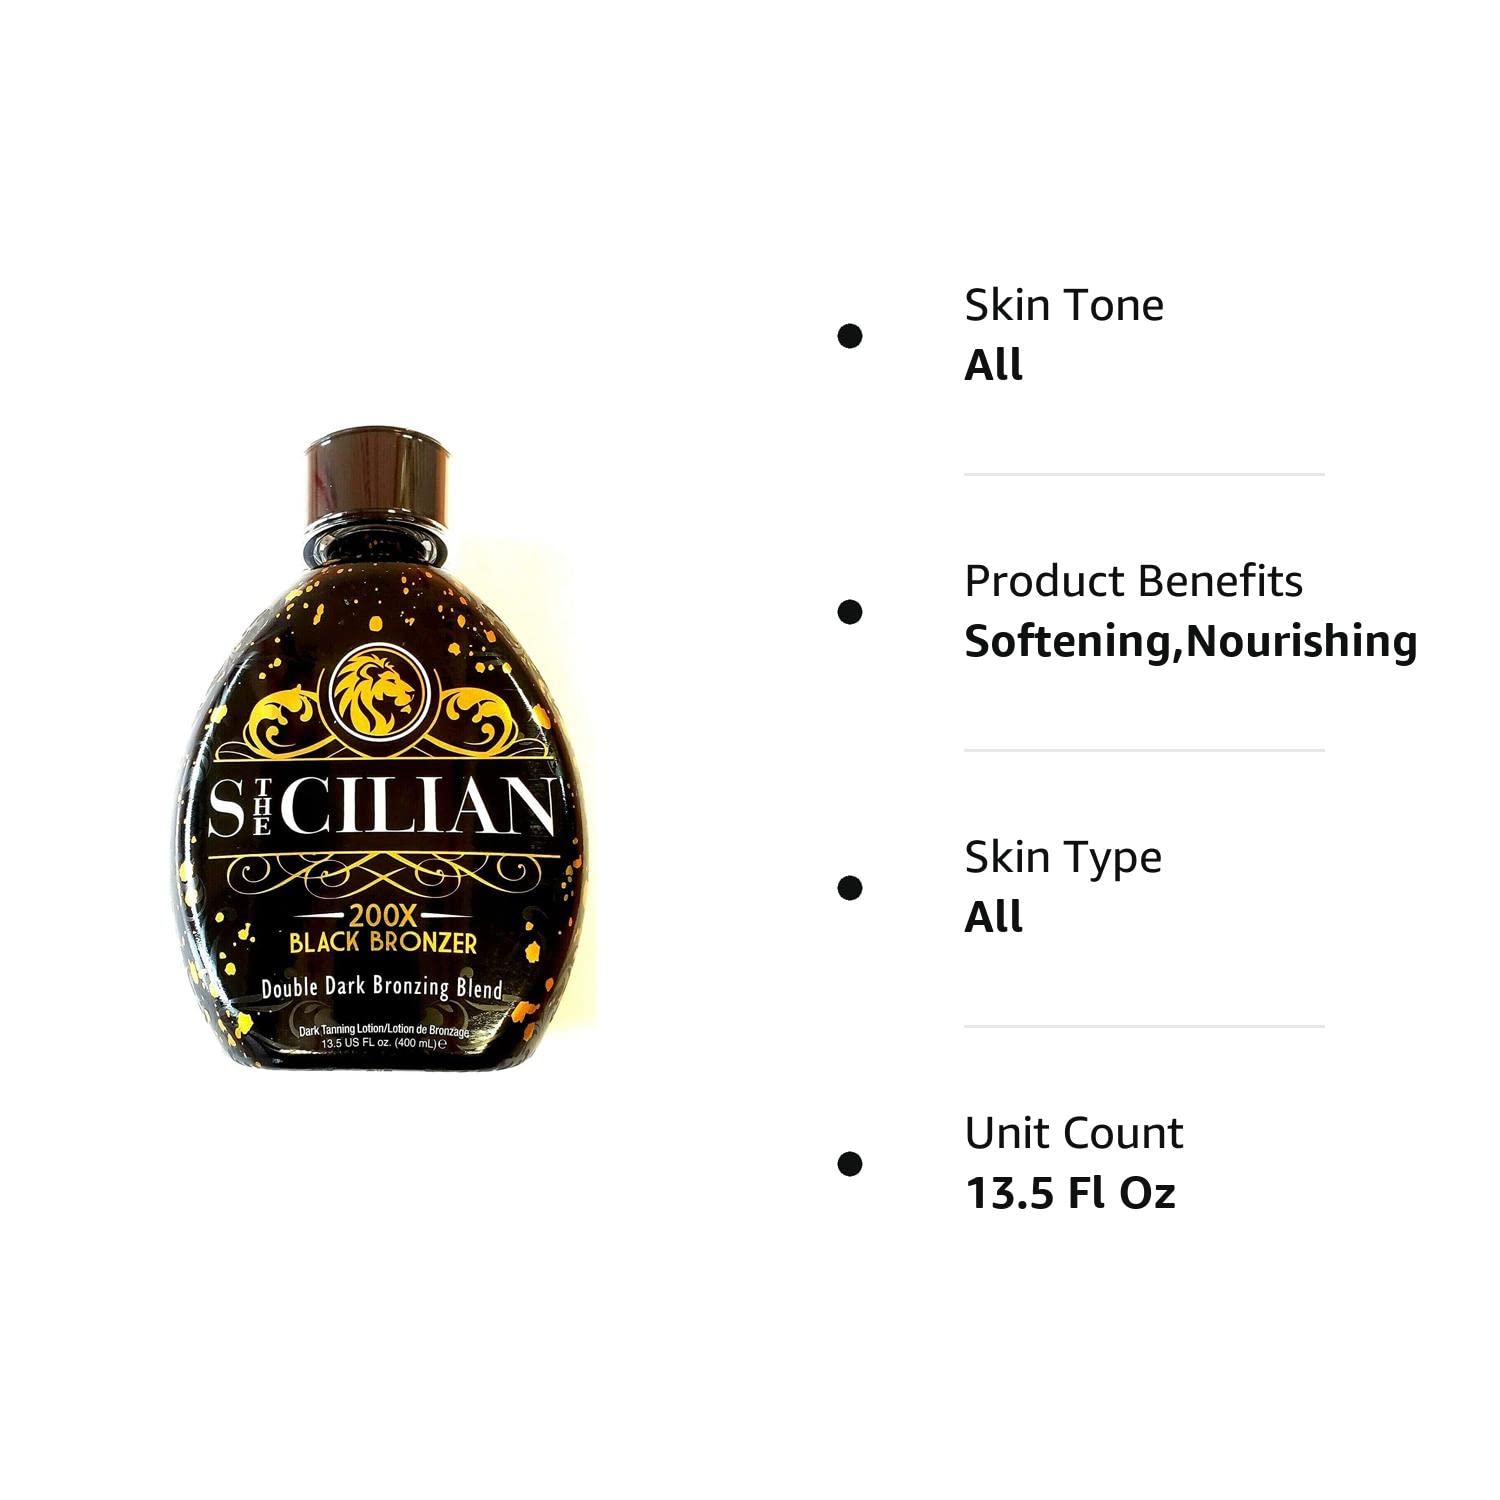 The Sicilian 200X Dark Black Bronzer Tanning Lotion – BEST Luxurious Tanning Lotion For Glowing Skin – Gradual Bronzing & Sunless Self Tanner Lotion – Nourishes Skin